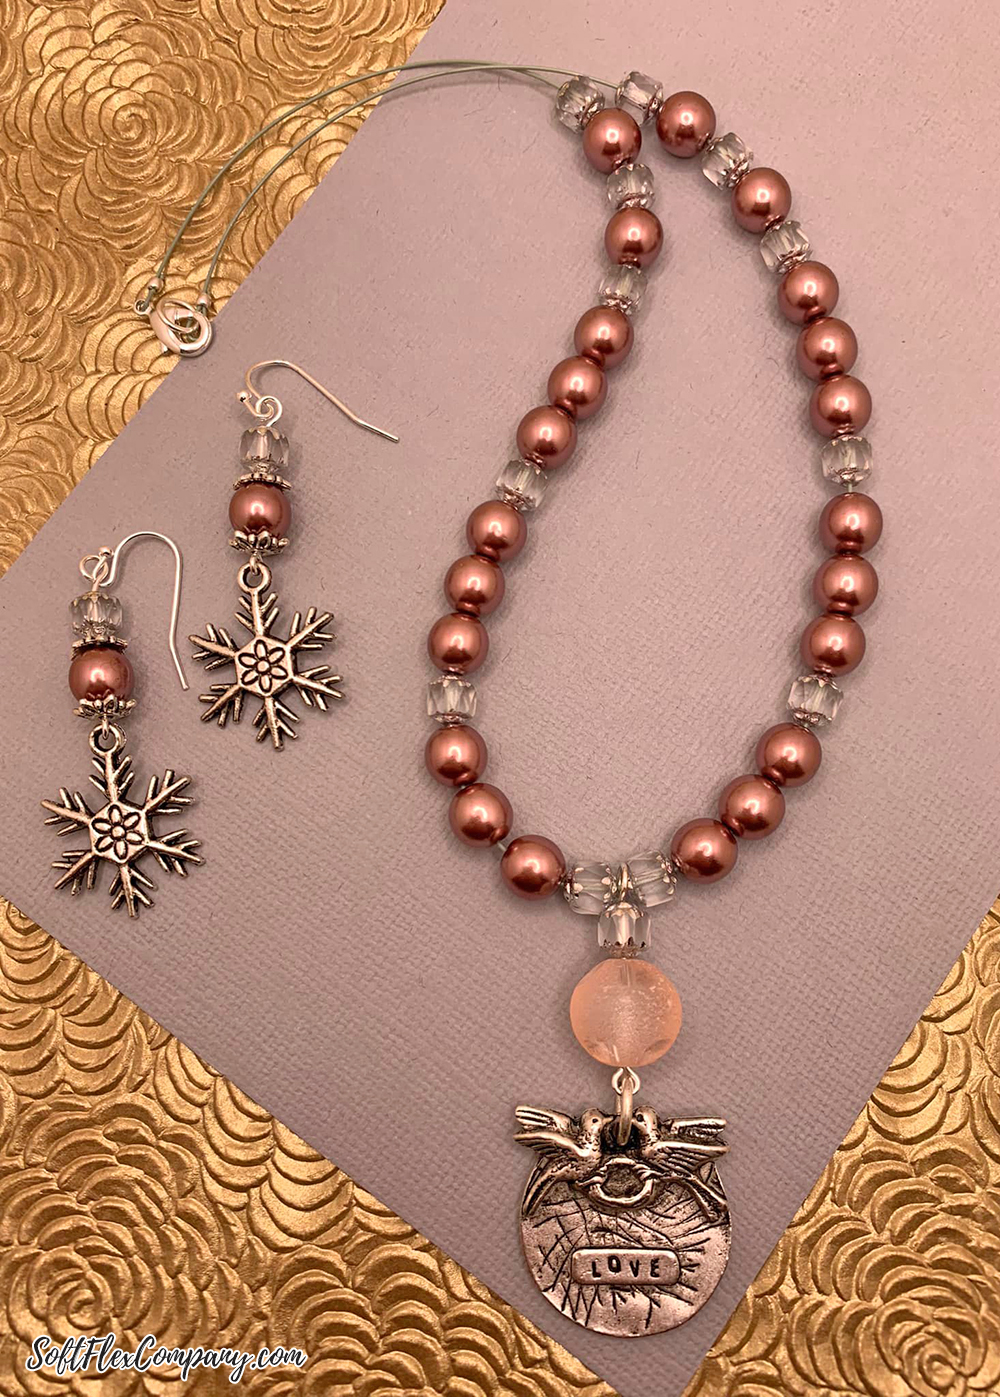 Rosé All Day Jewelry by Stacy Grano Meissner